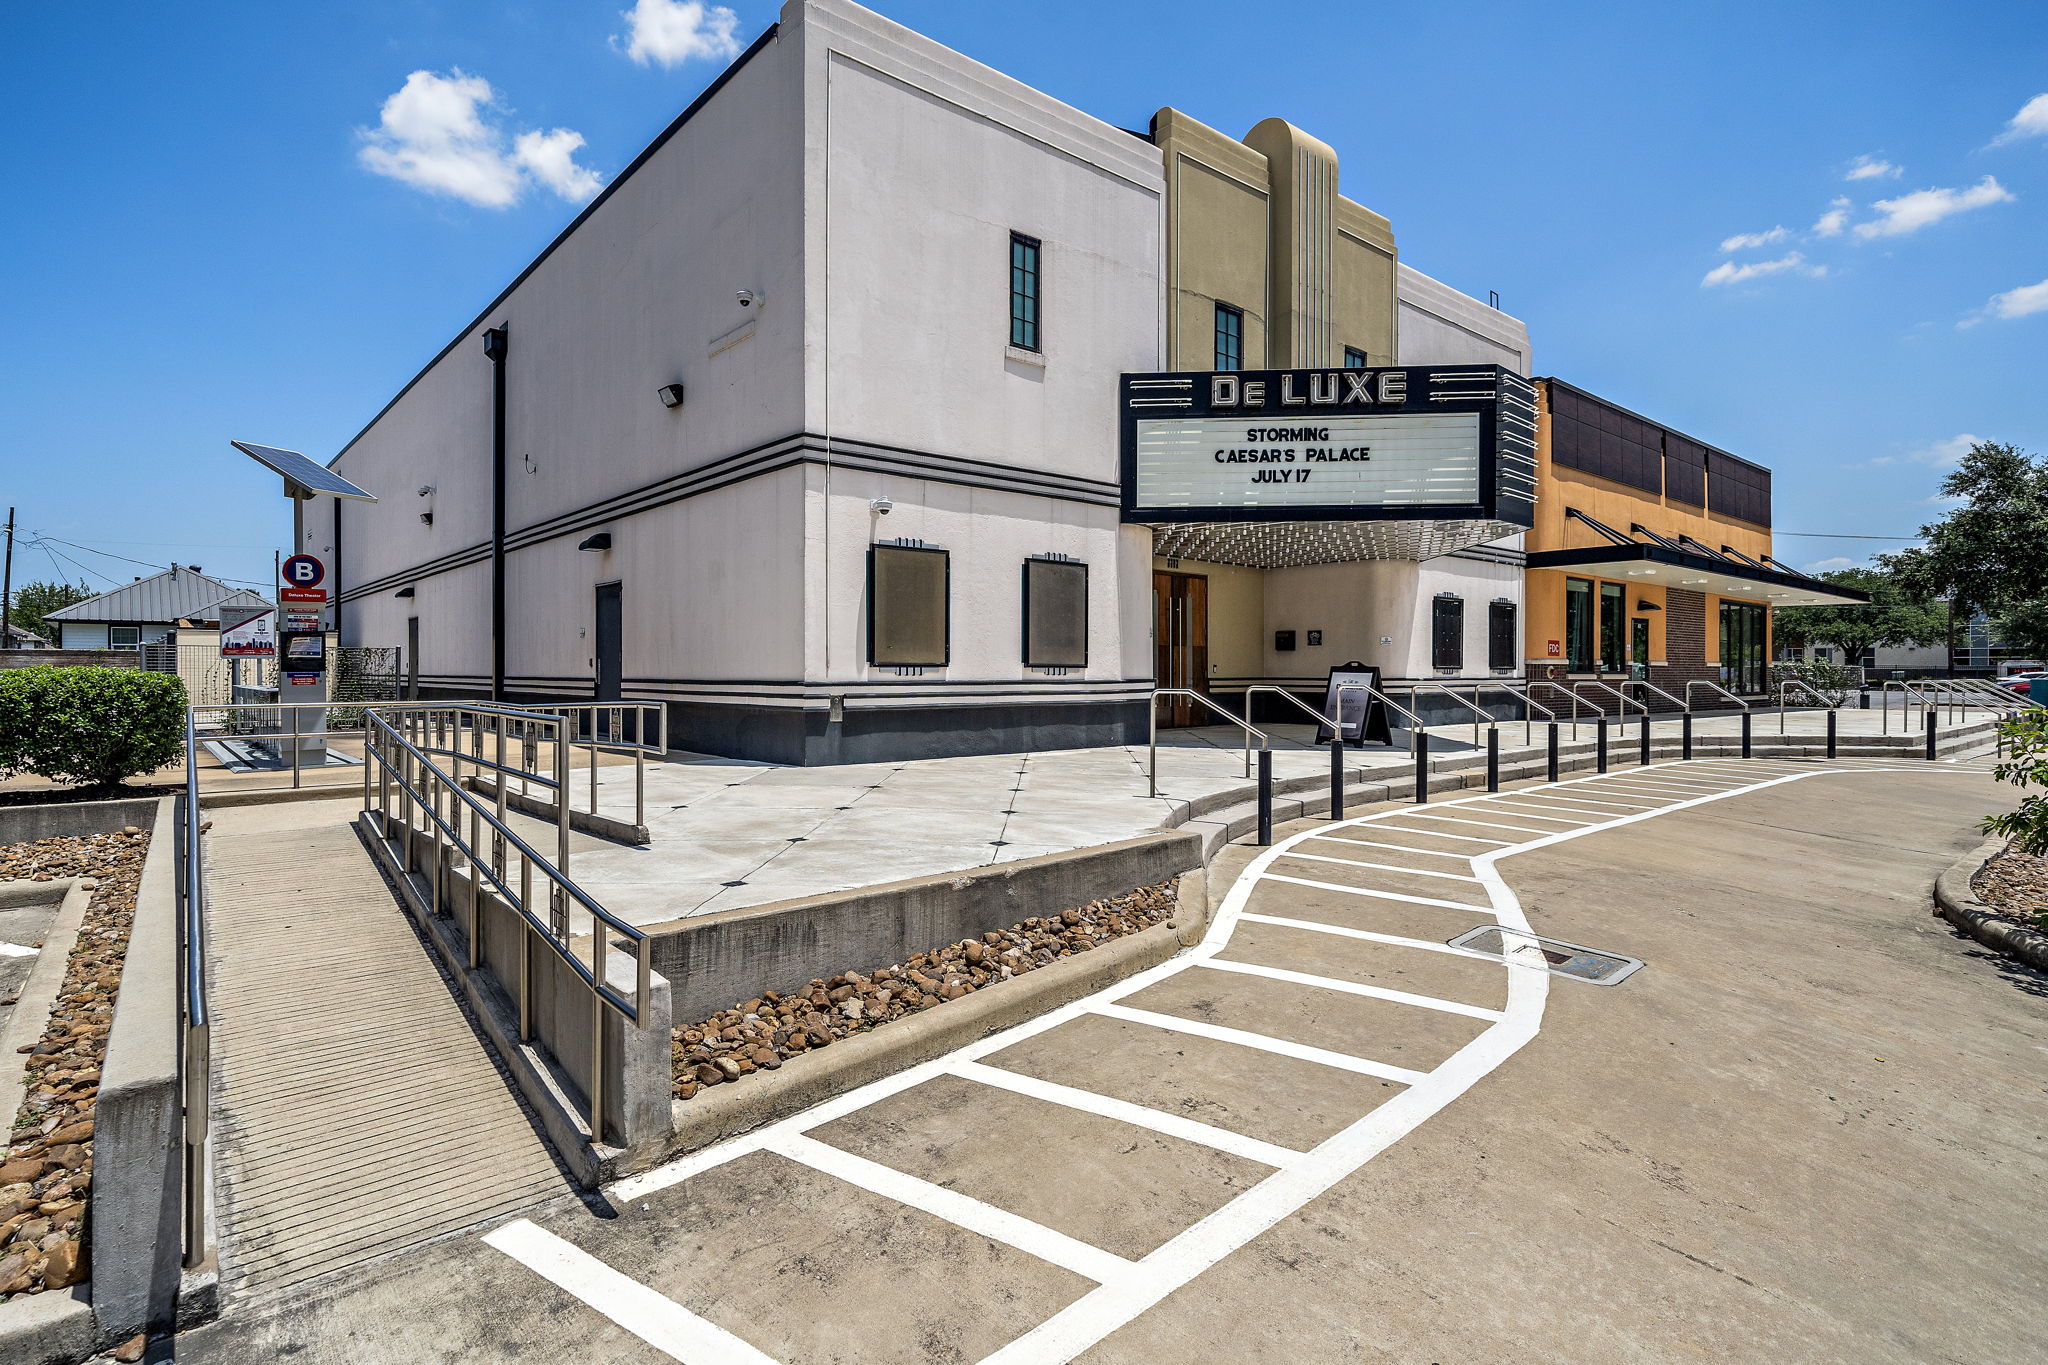 The DeLUXE Theater entrance showing the driveway with access ramp